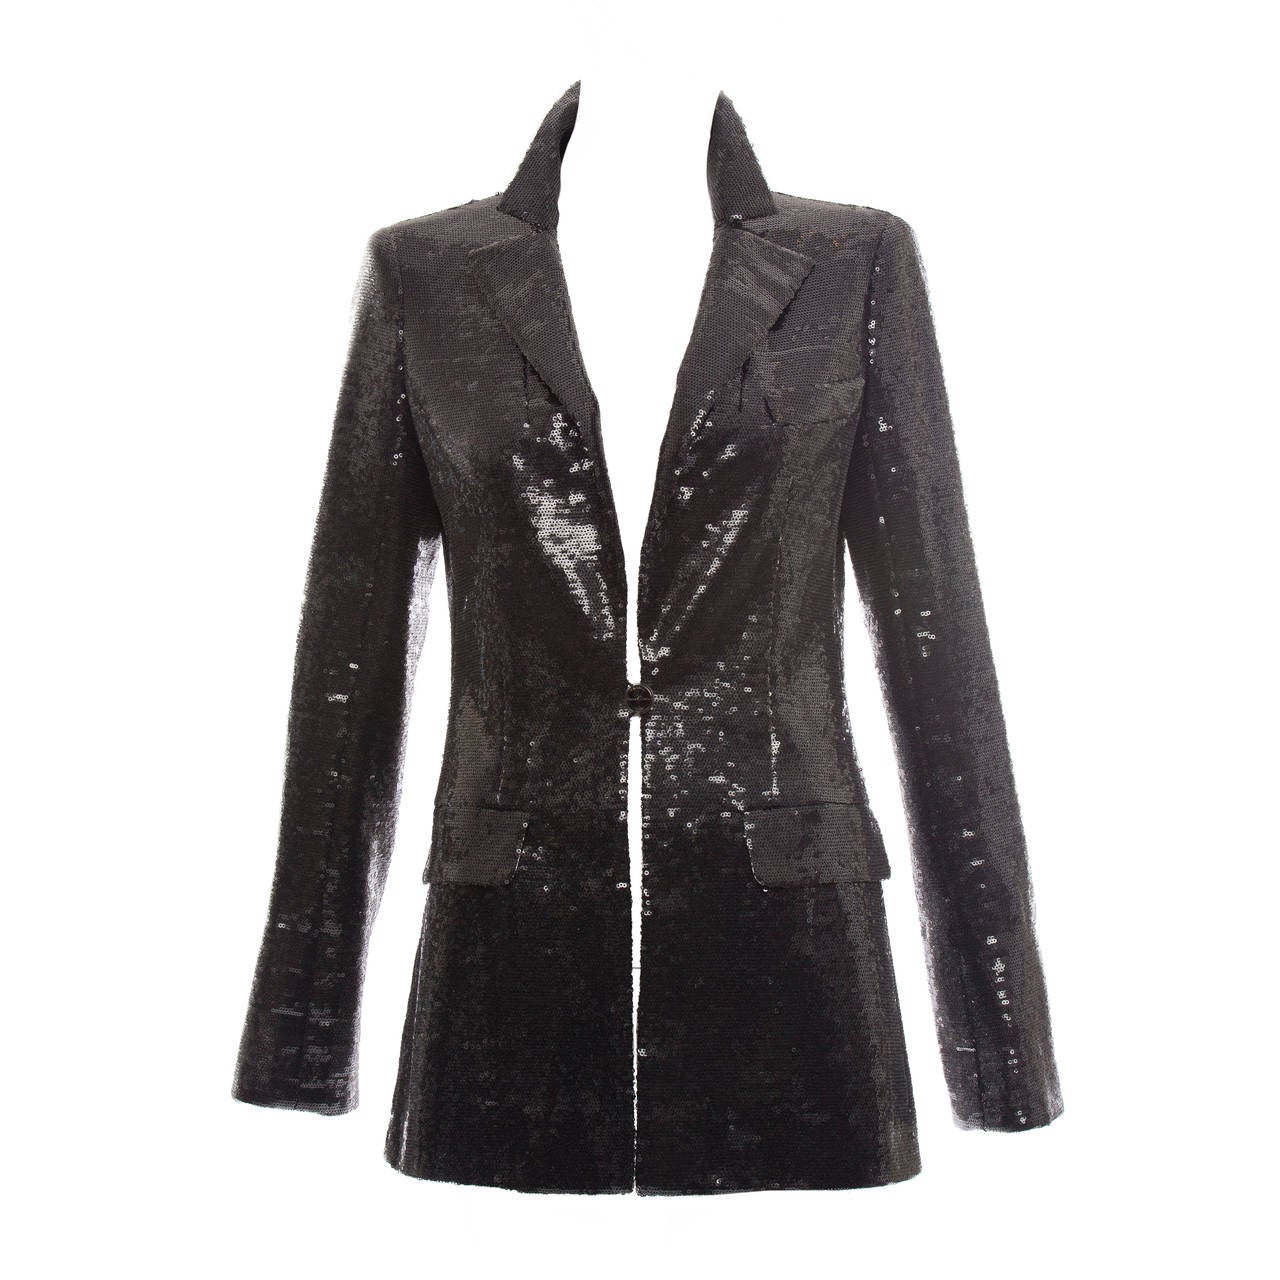 Chanel Black Embroidered Sequin Evening Jacket Ivory Silk Cuffs, Cruise 2009 For Sale 11